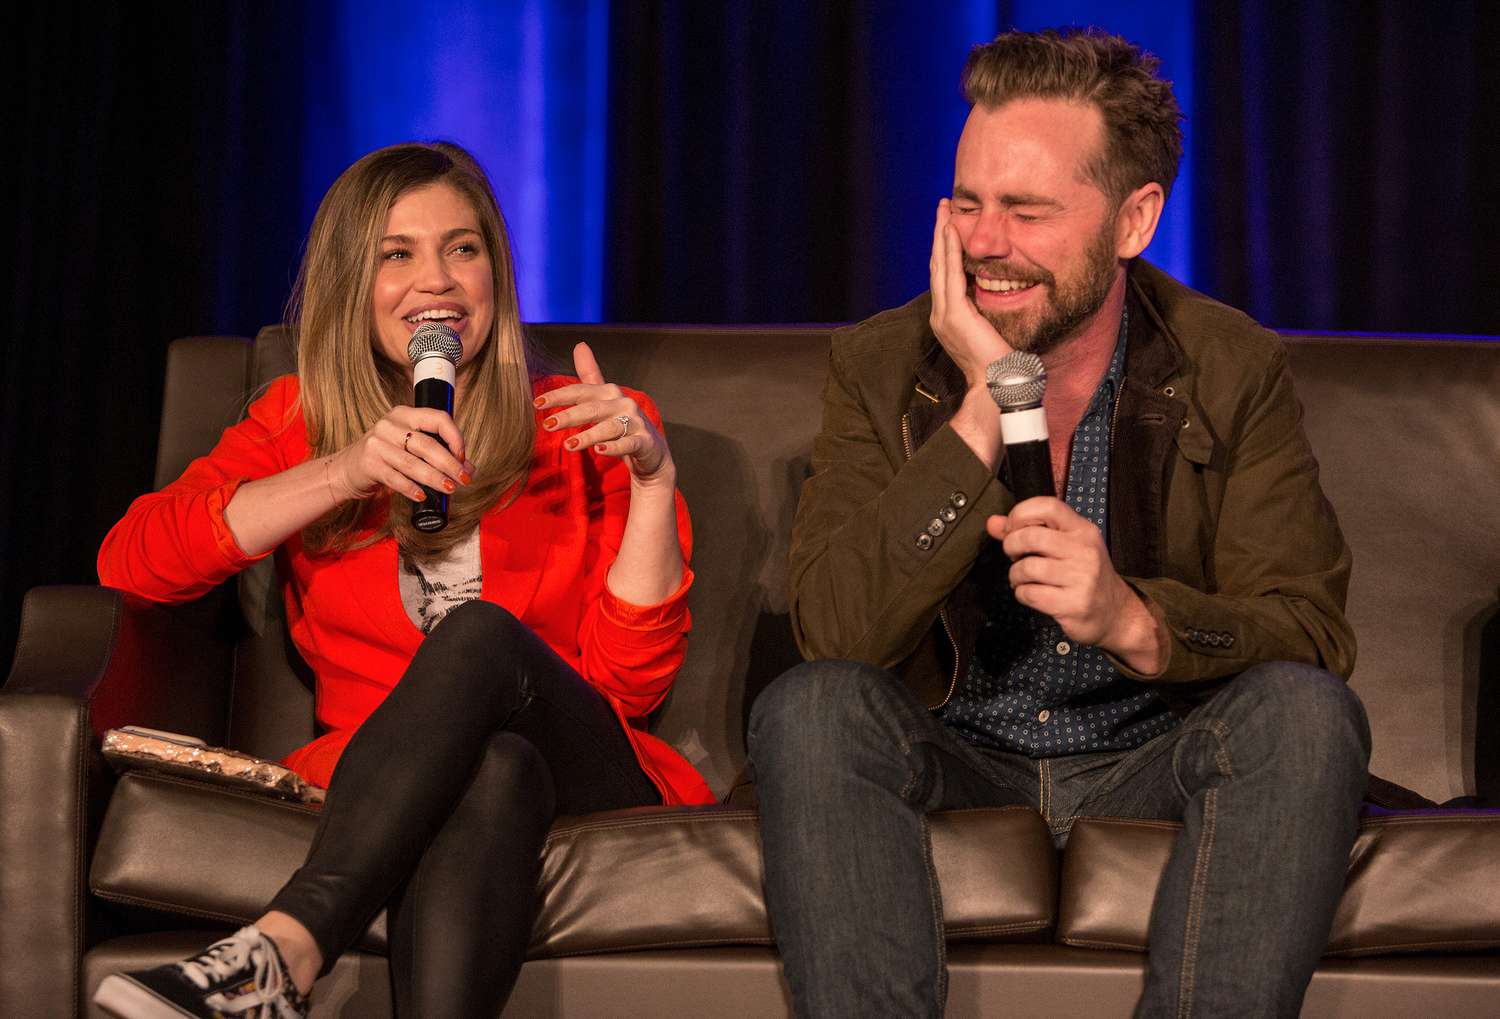 Danielle Fishel and Rider Strong during the Wizard World Chicago Comic-Con at Donald E. Stephens Convention Center on August 24, 2018 in Rosemont, Illinois.